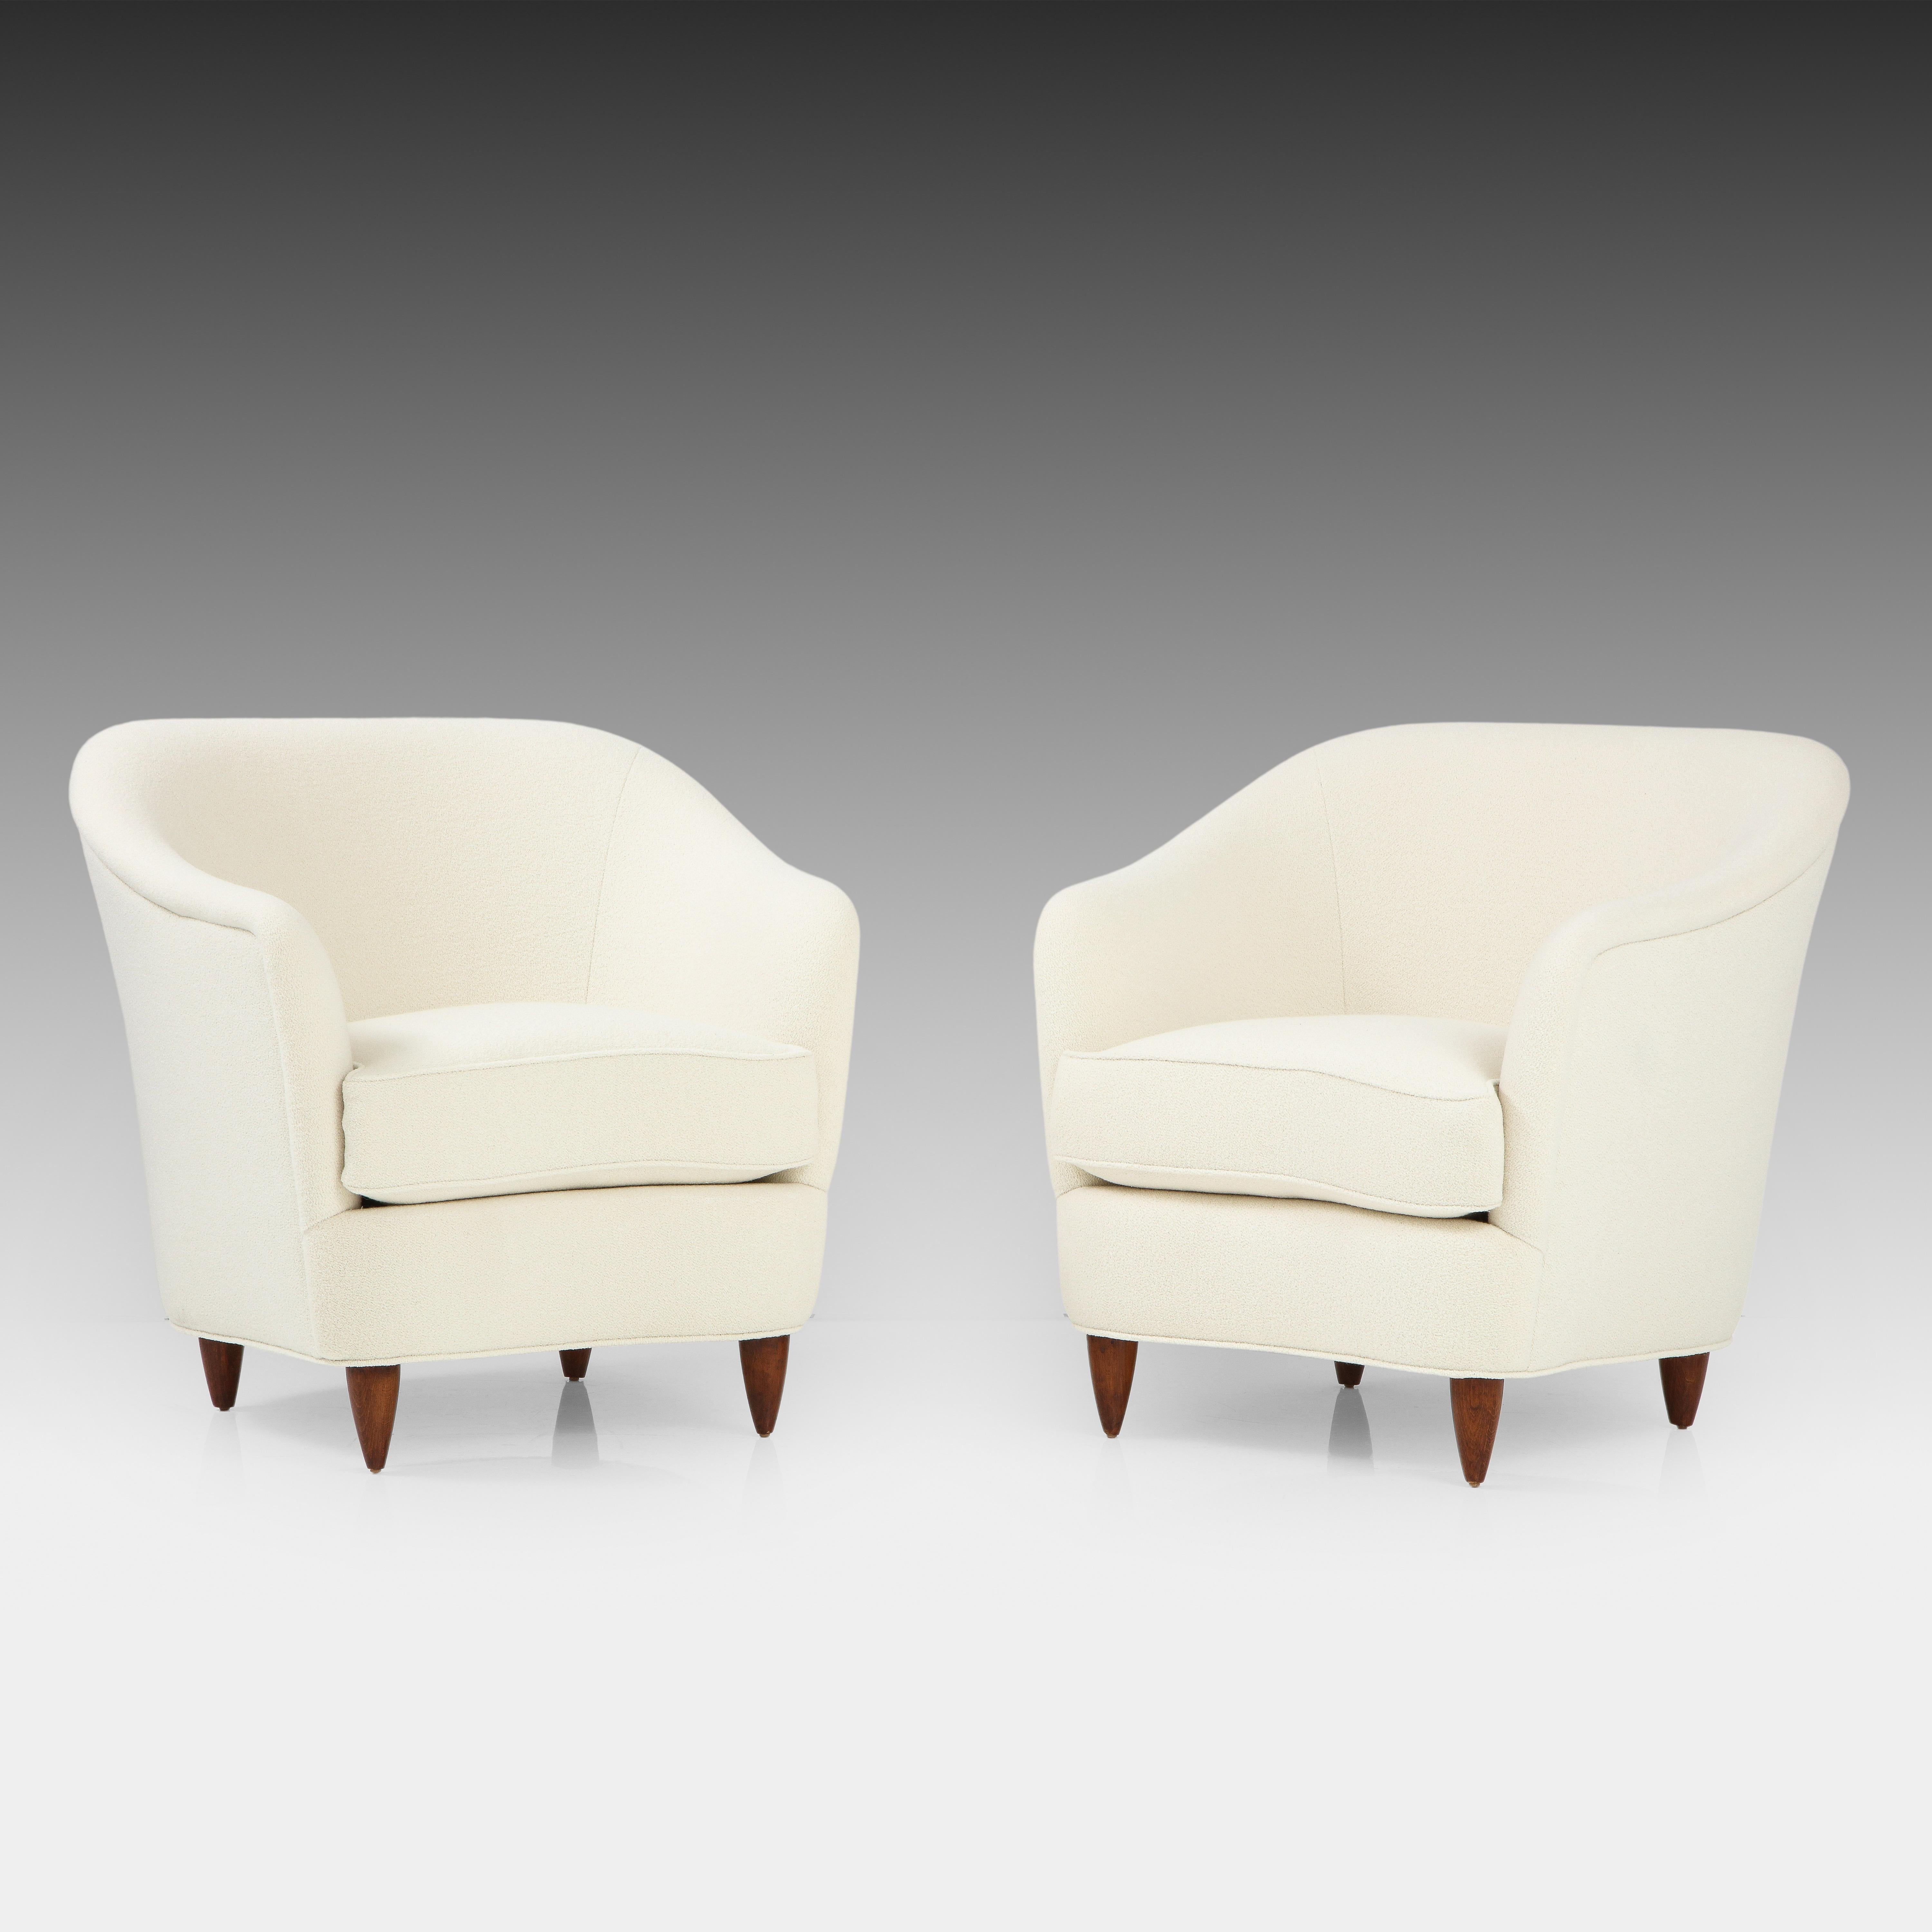 Gio Ponti for Casa e Giardino pair of ivory or cream armchairs or lounge chairs with gently curved backrests and tapered Italian walnut legs, Italy, 1940s. Classic and elegant in their design, these stylish Ponti armchairs are also very comfortable